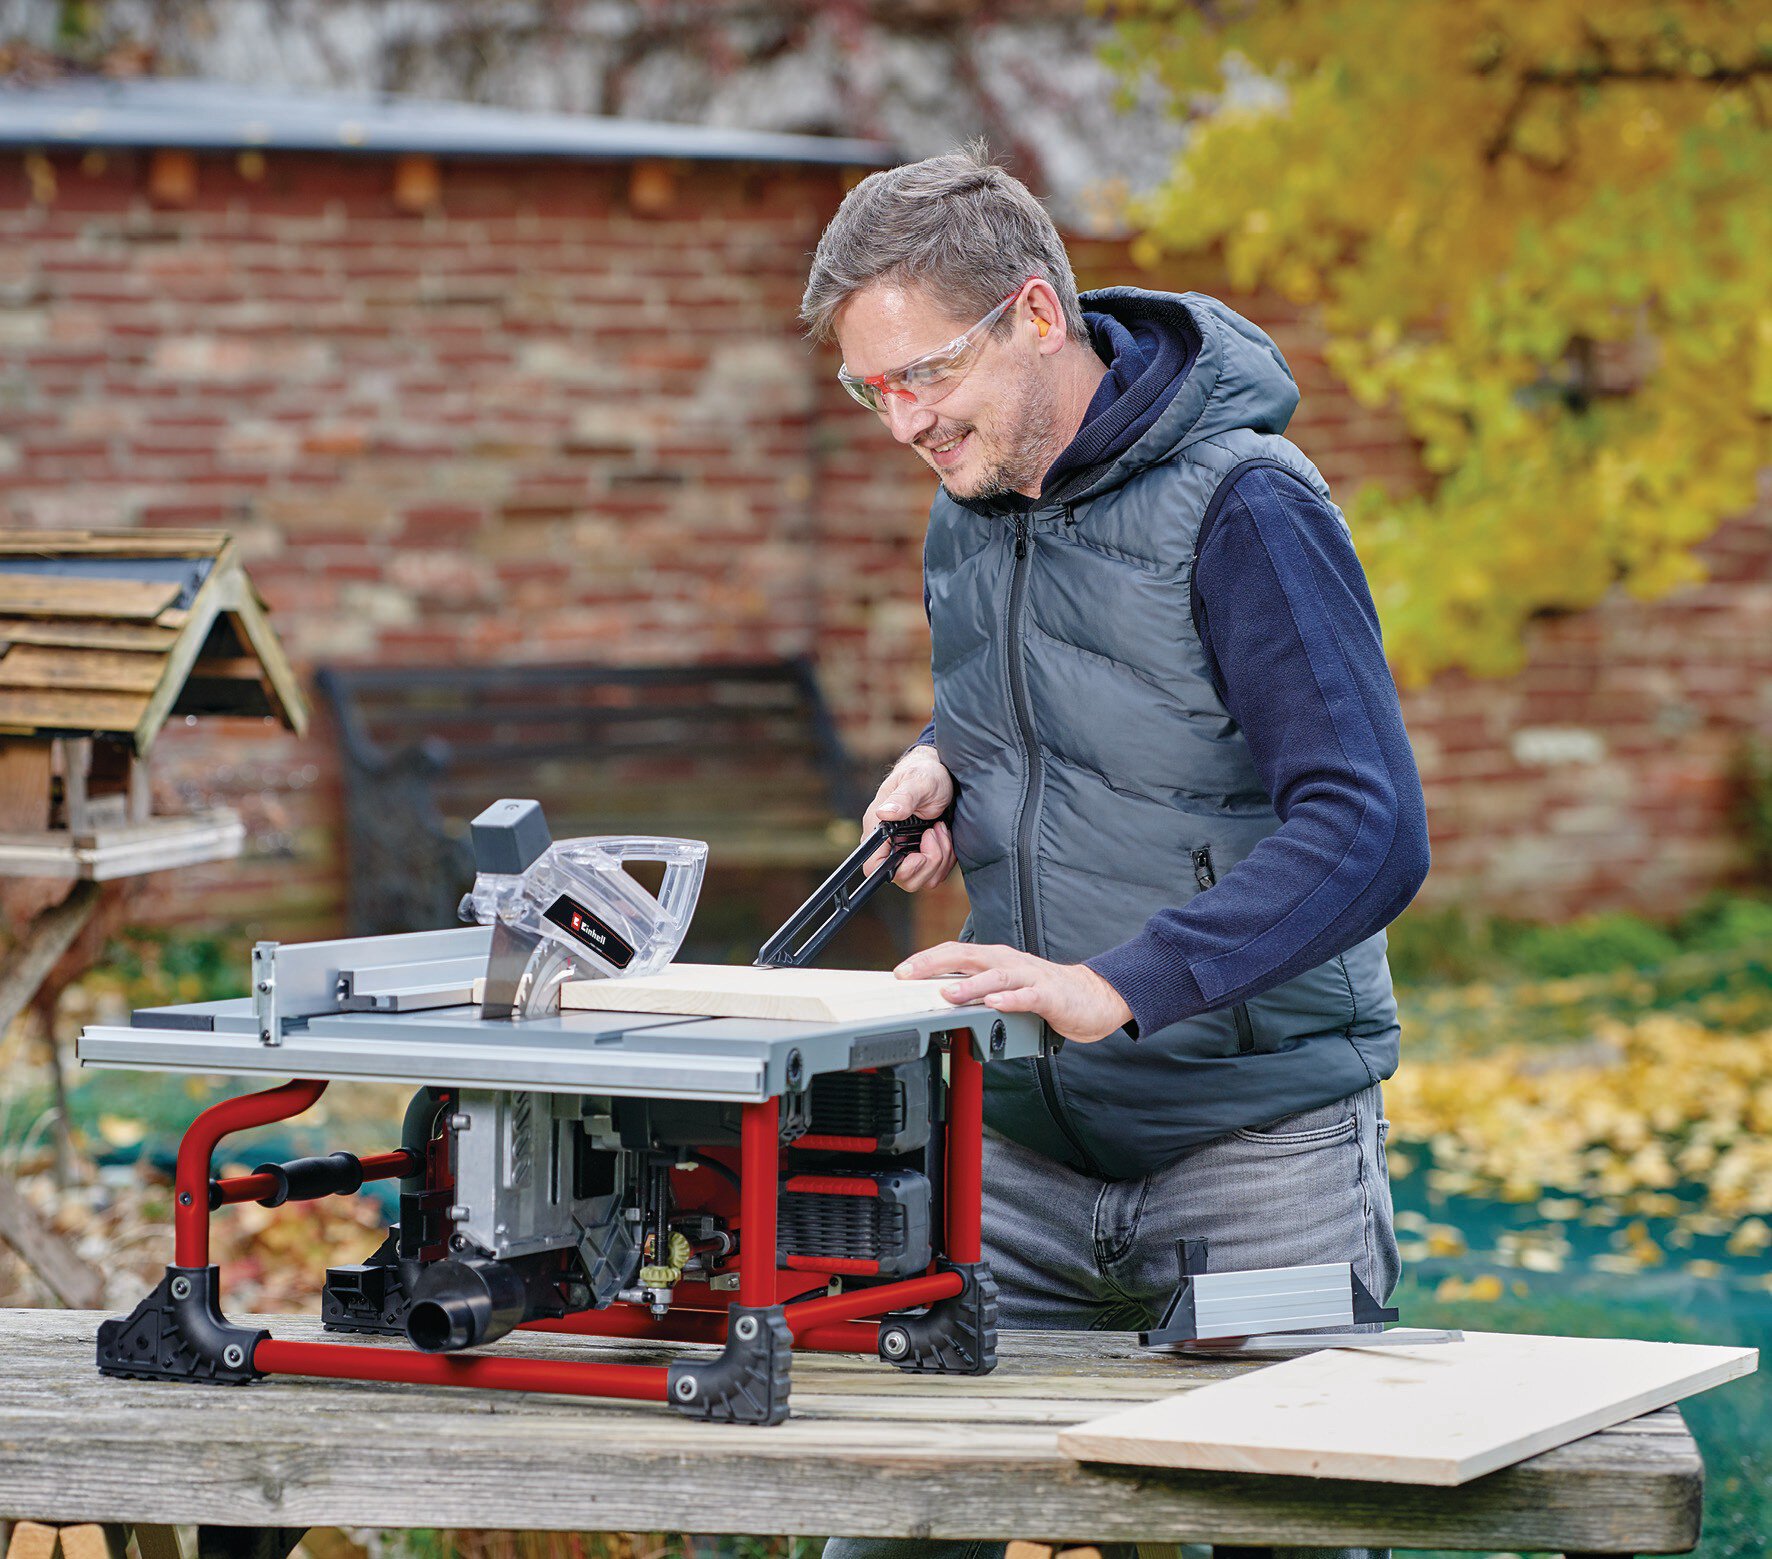 einhell-expert-cordless-table-saw-4340450-example_usage-001